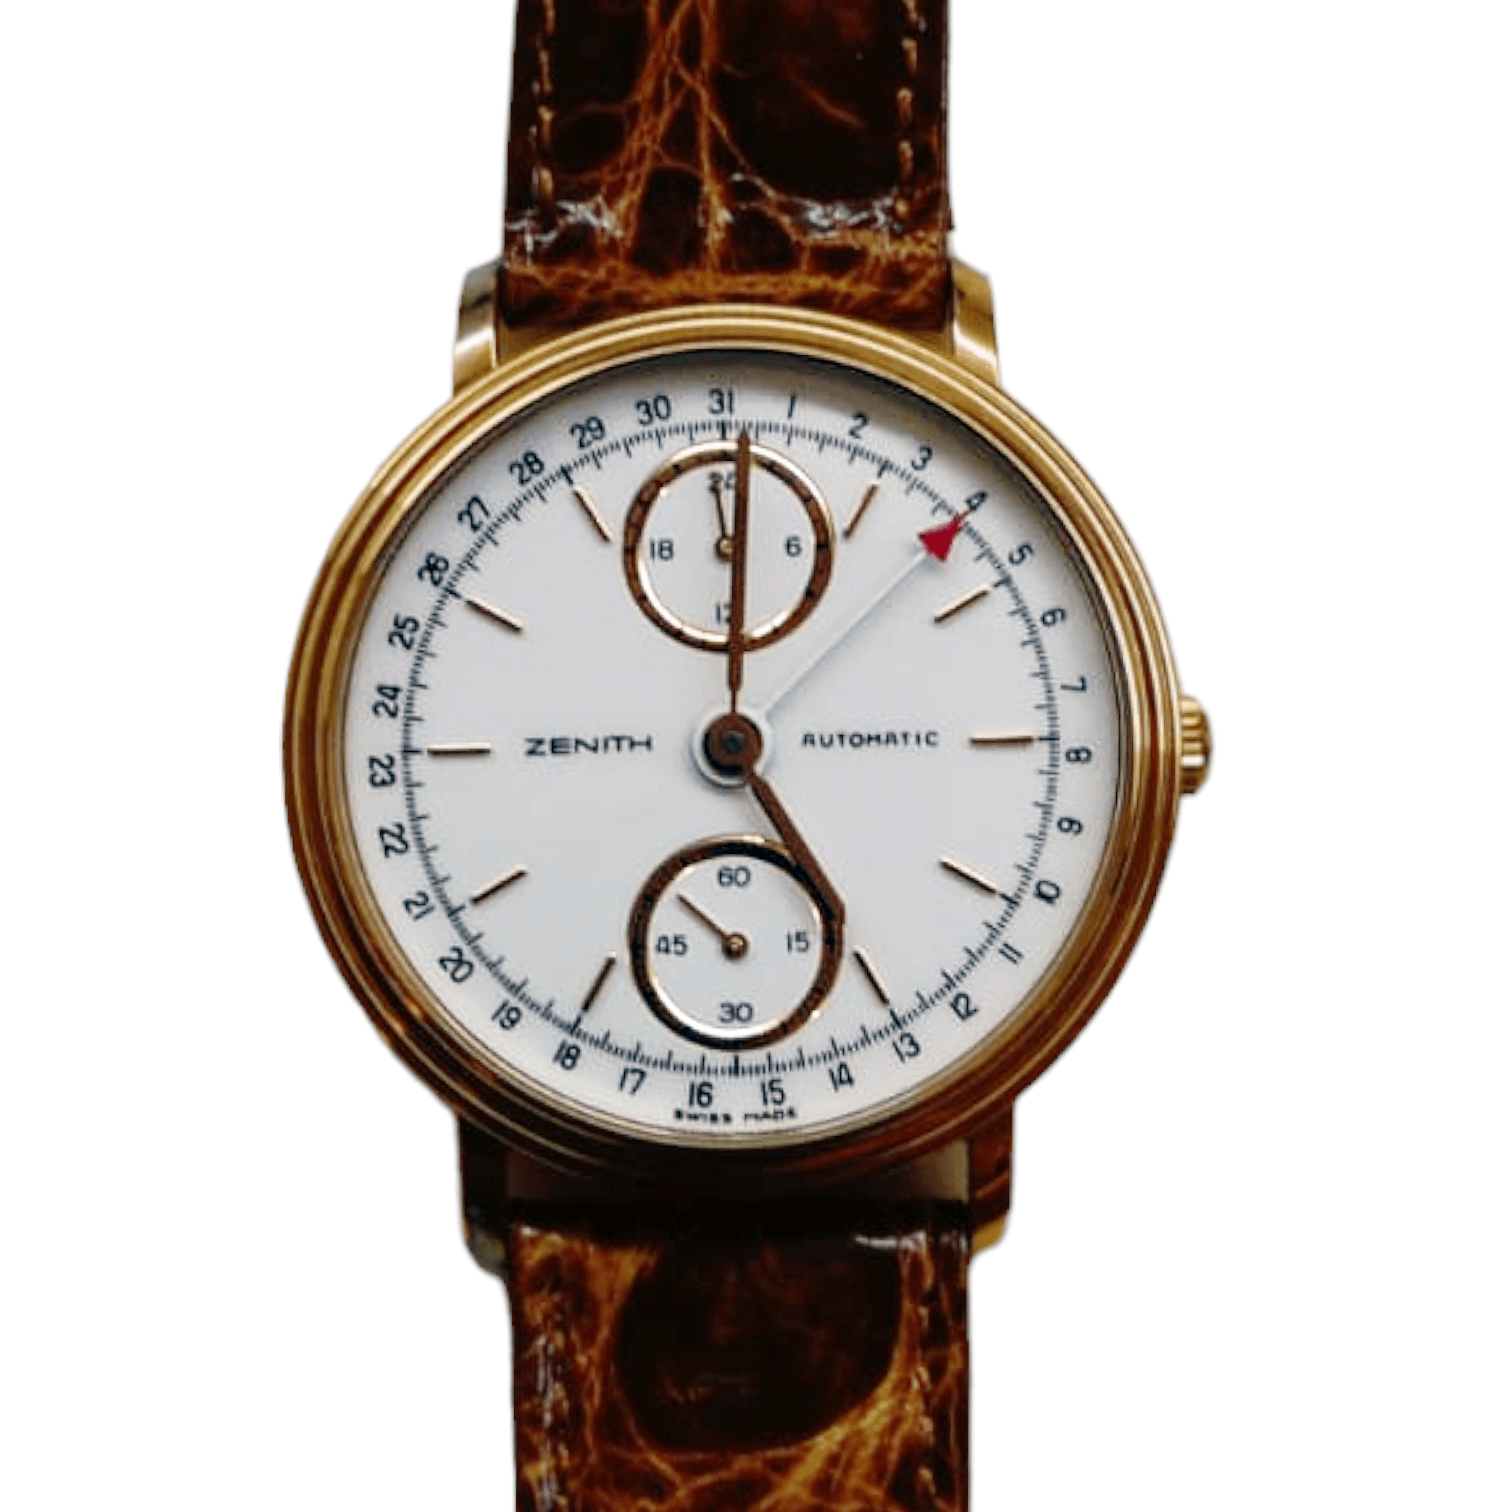 Zenith Automatic 24H Laminated Gold Ref. 27.0010.463 - ON6029 - LuxuryInStock